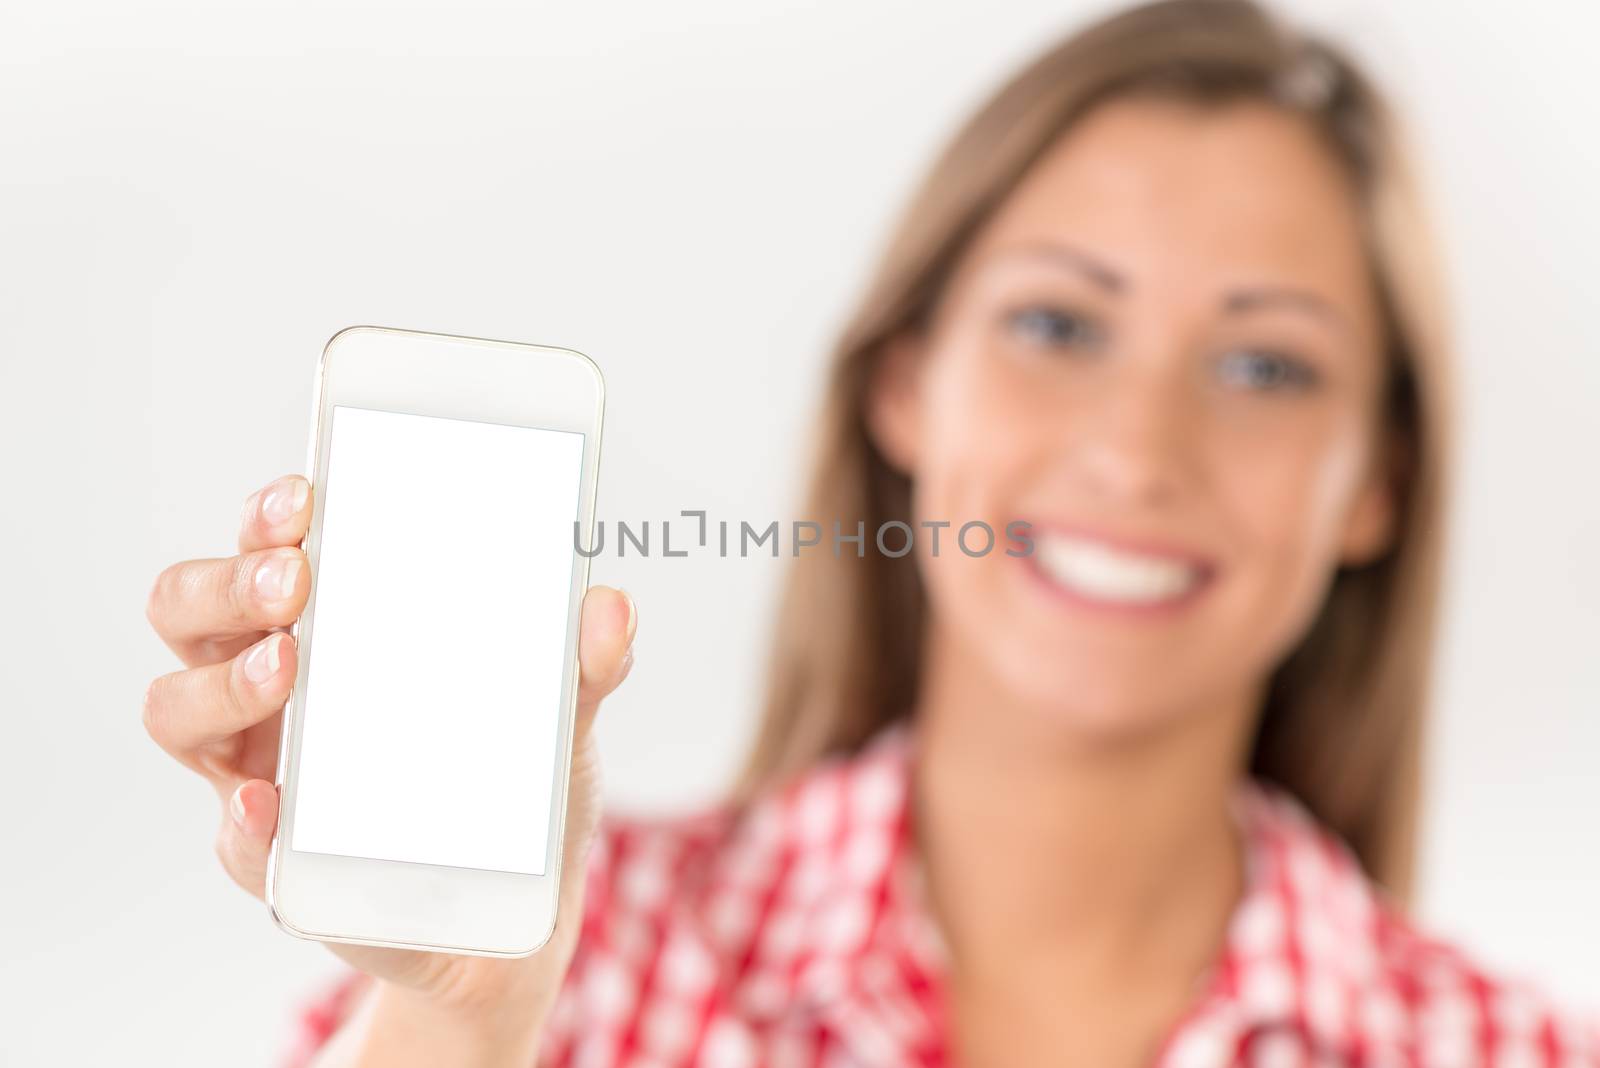 Beautiful young woman showing white smartphone with blank screen. Selective focus. Focus on phone, on foreground.